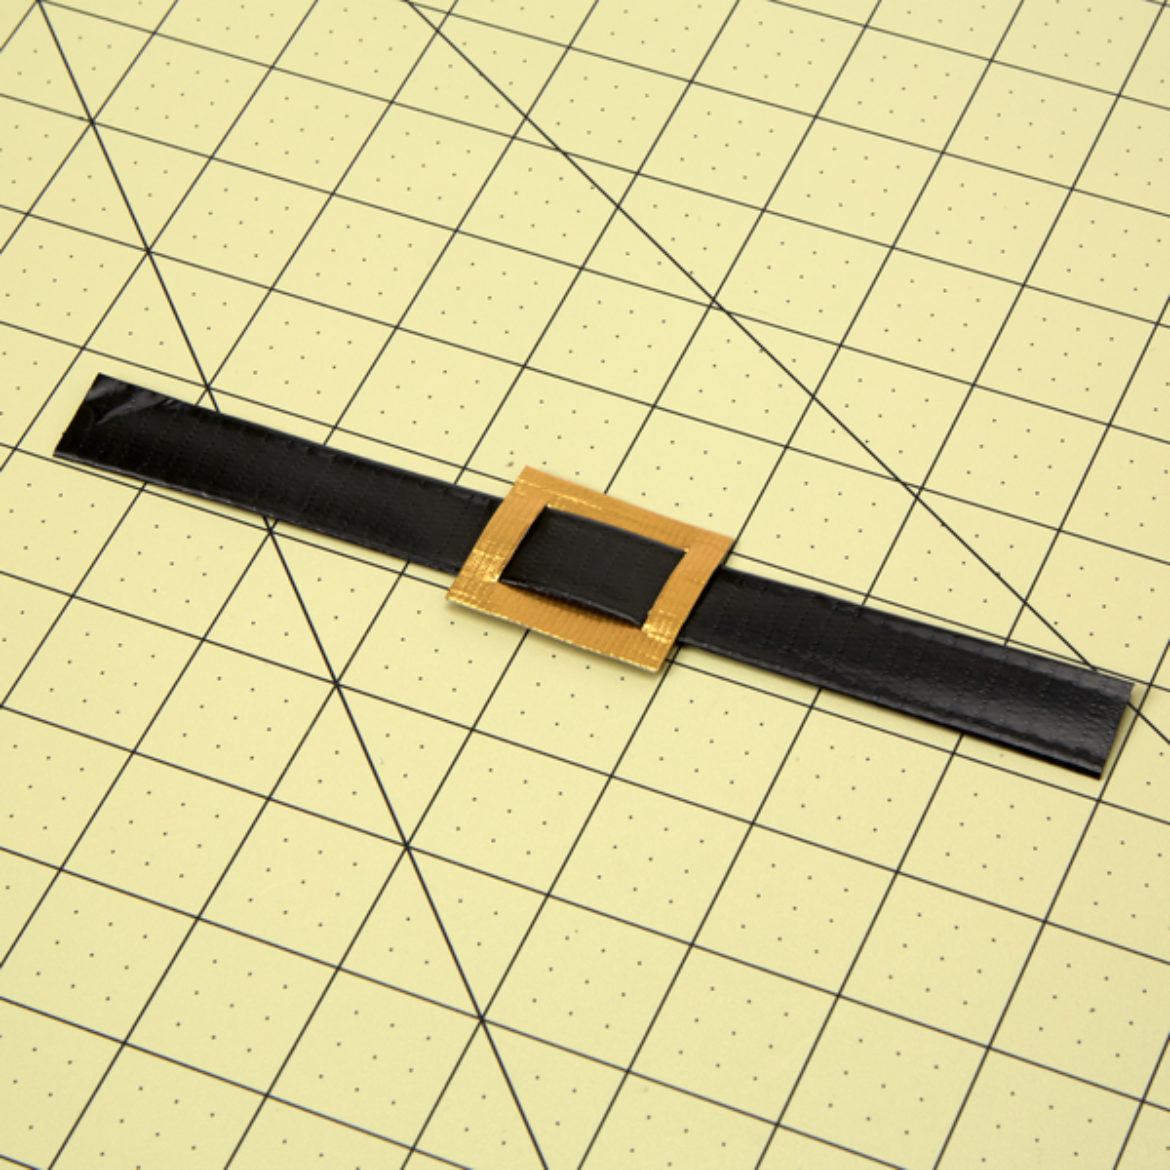 Cut two slits into the previous gold rectangle and feed the strap through to form a buckle and strap